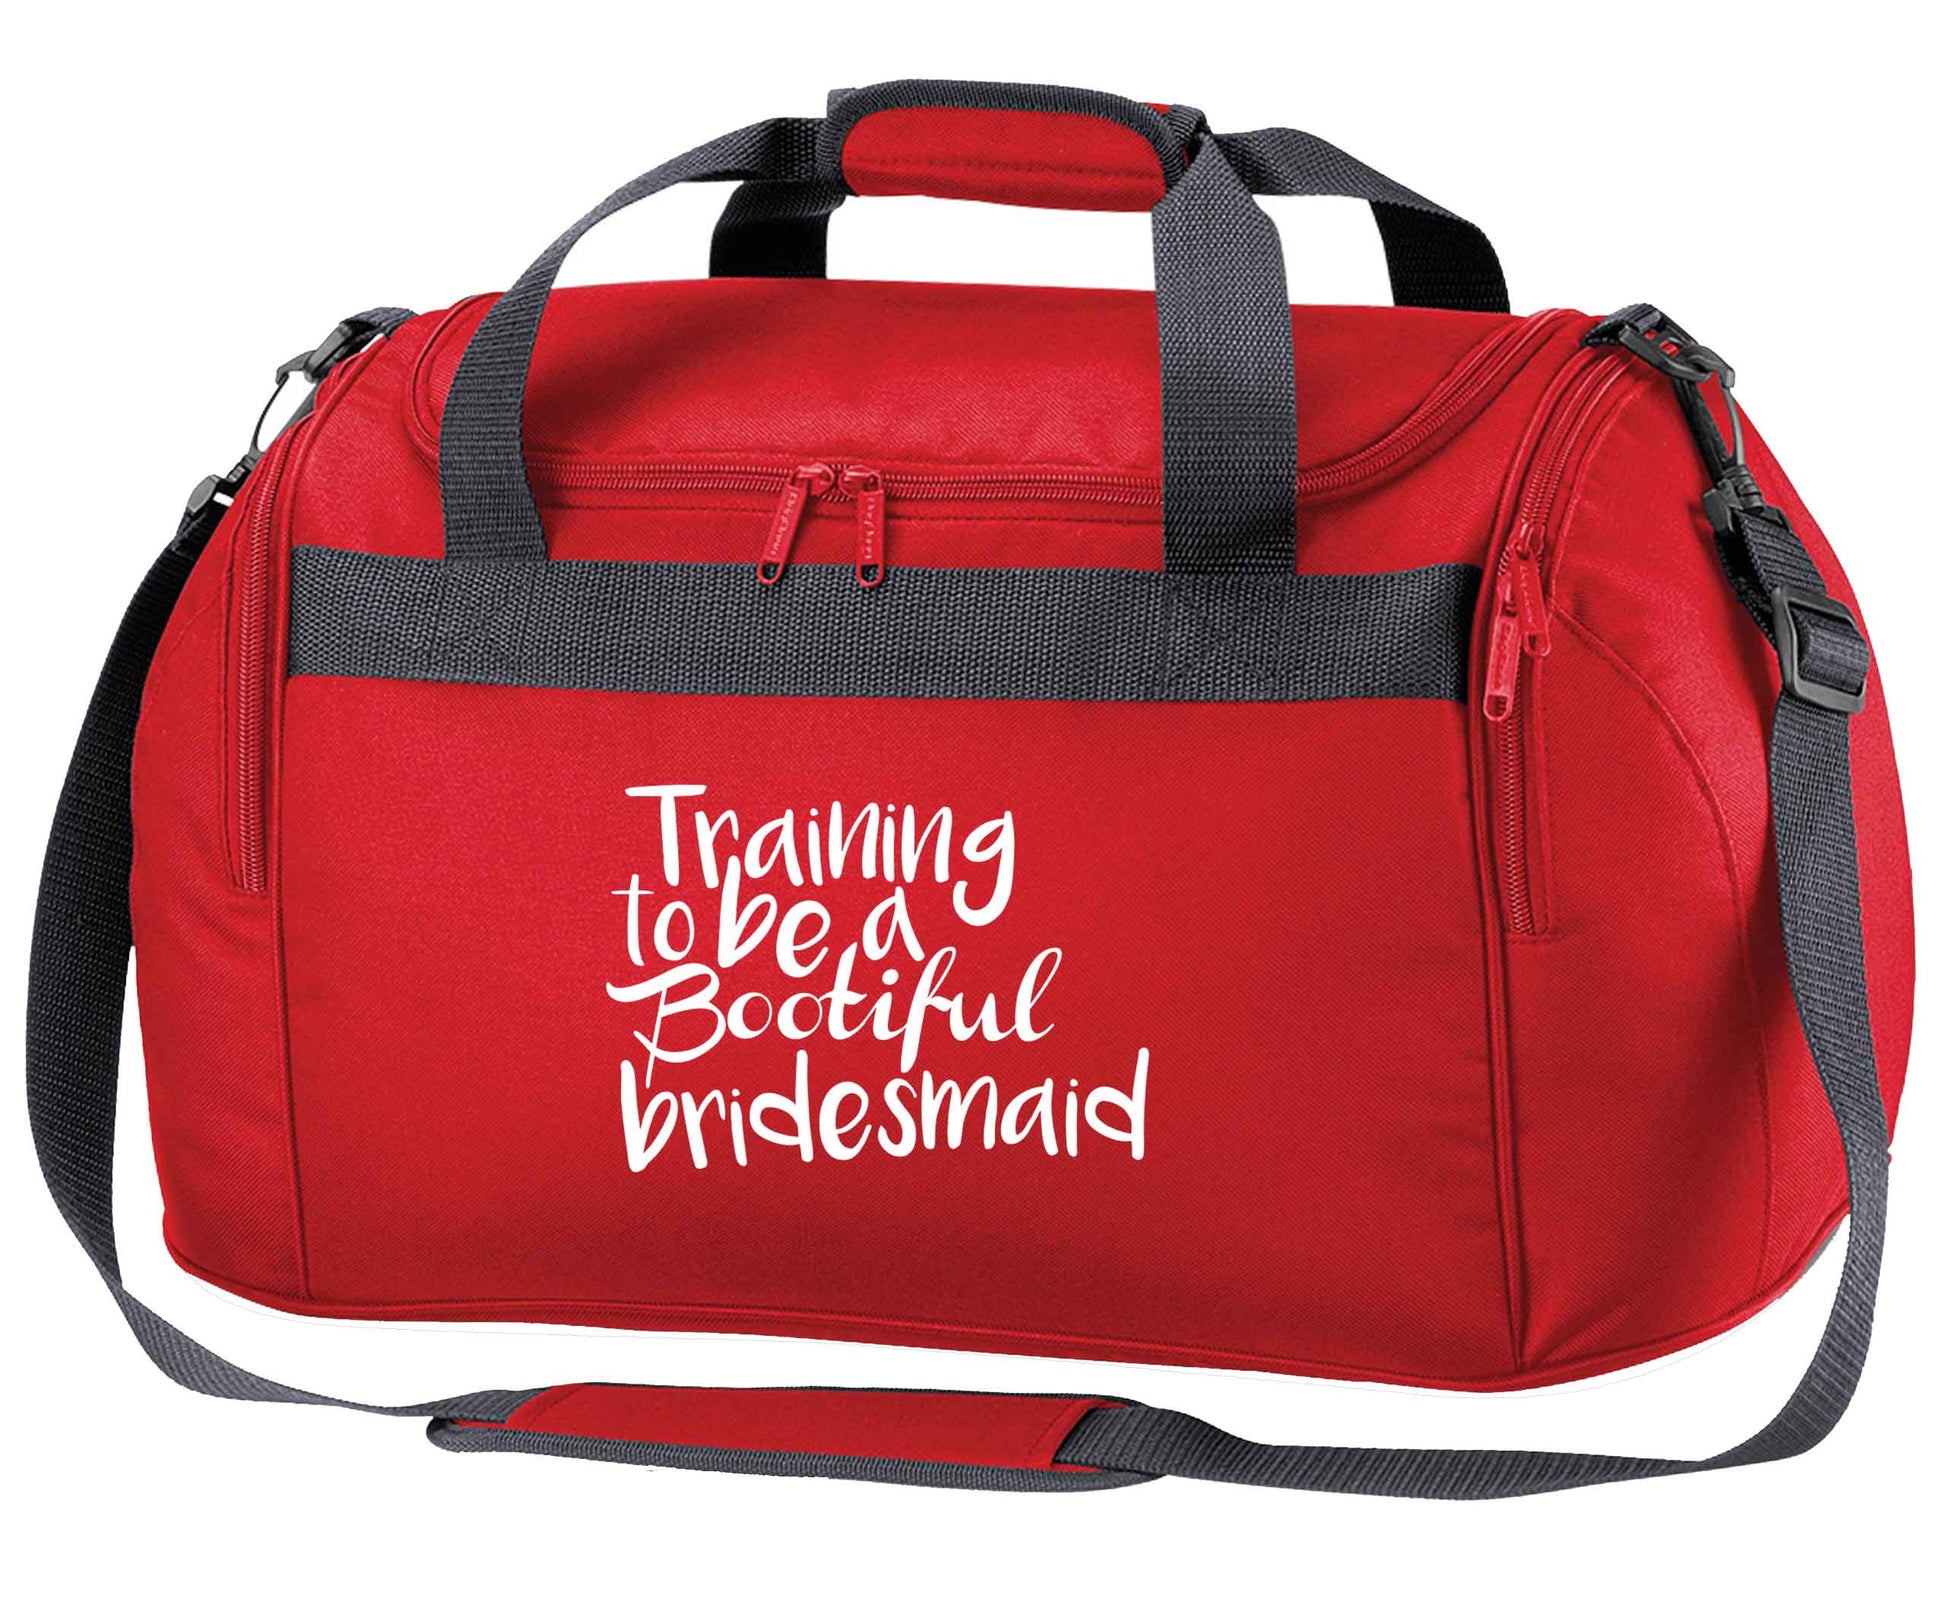 Get motivated and get fit for your big day! Our workout quotes and designs will get you ready to sweat! Perfect for any bride, groom or bridesmaid to be!  red holdall / duffel bag